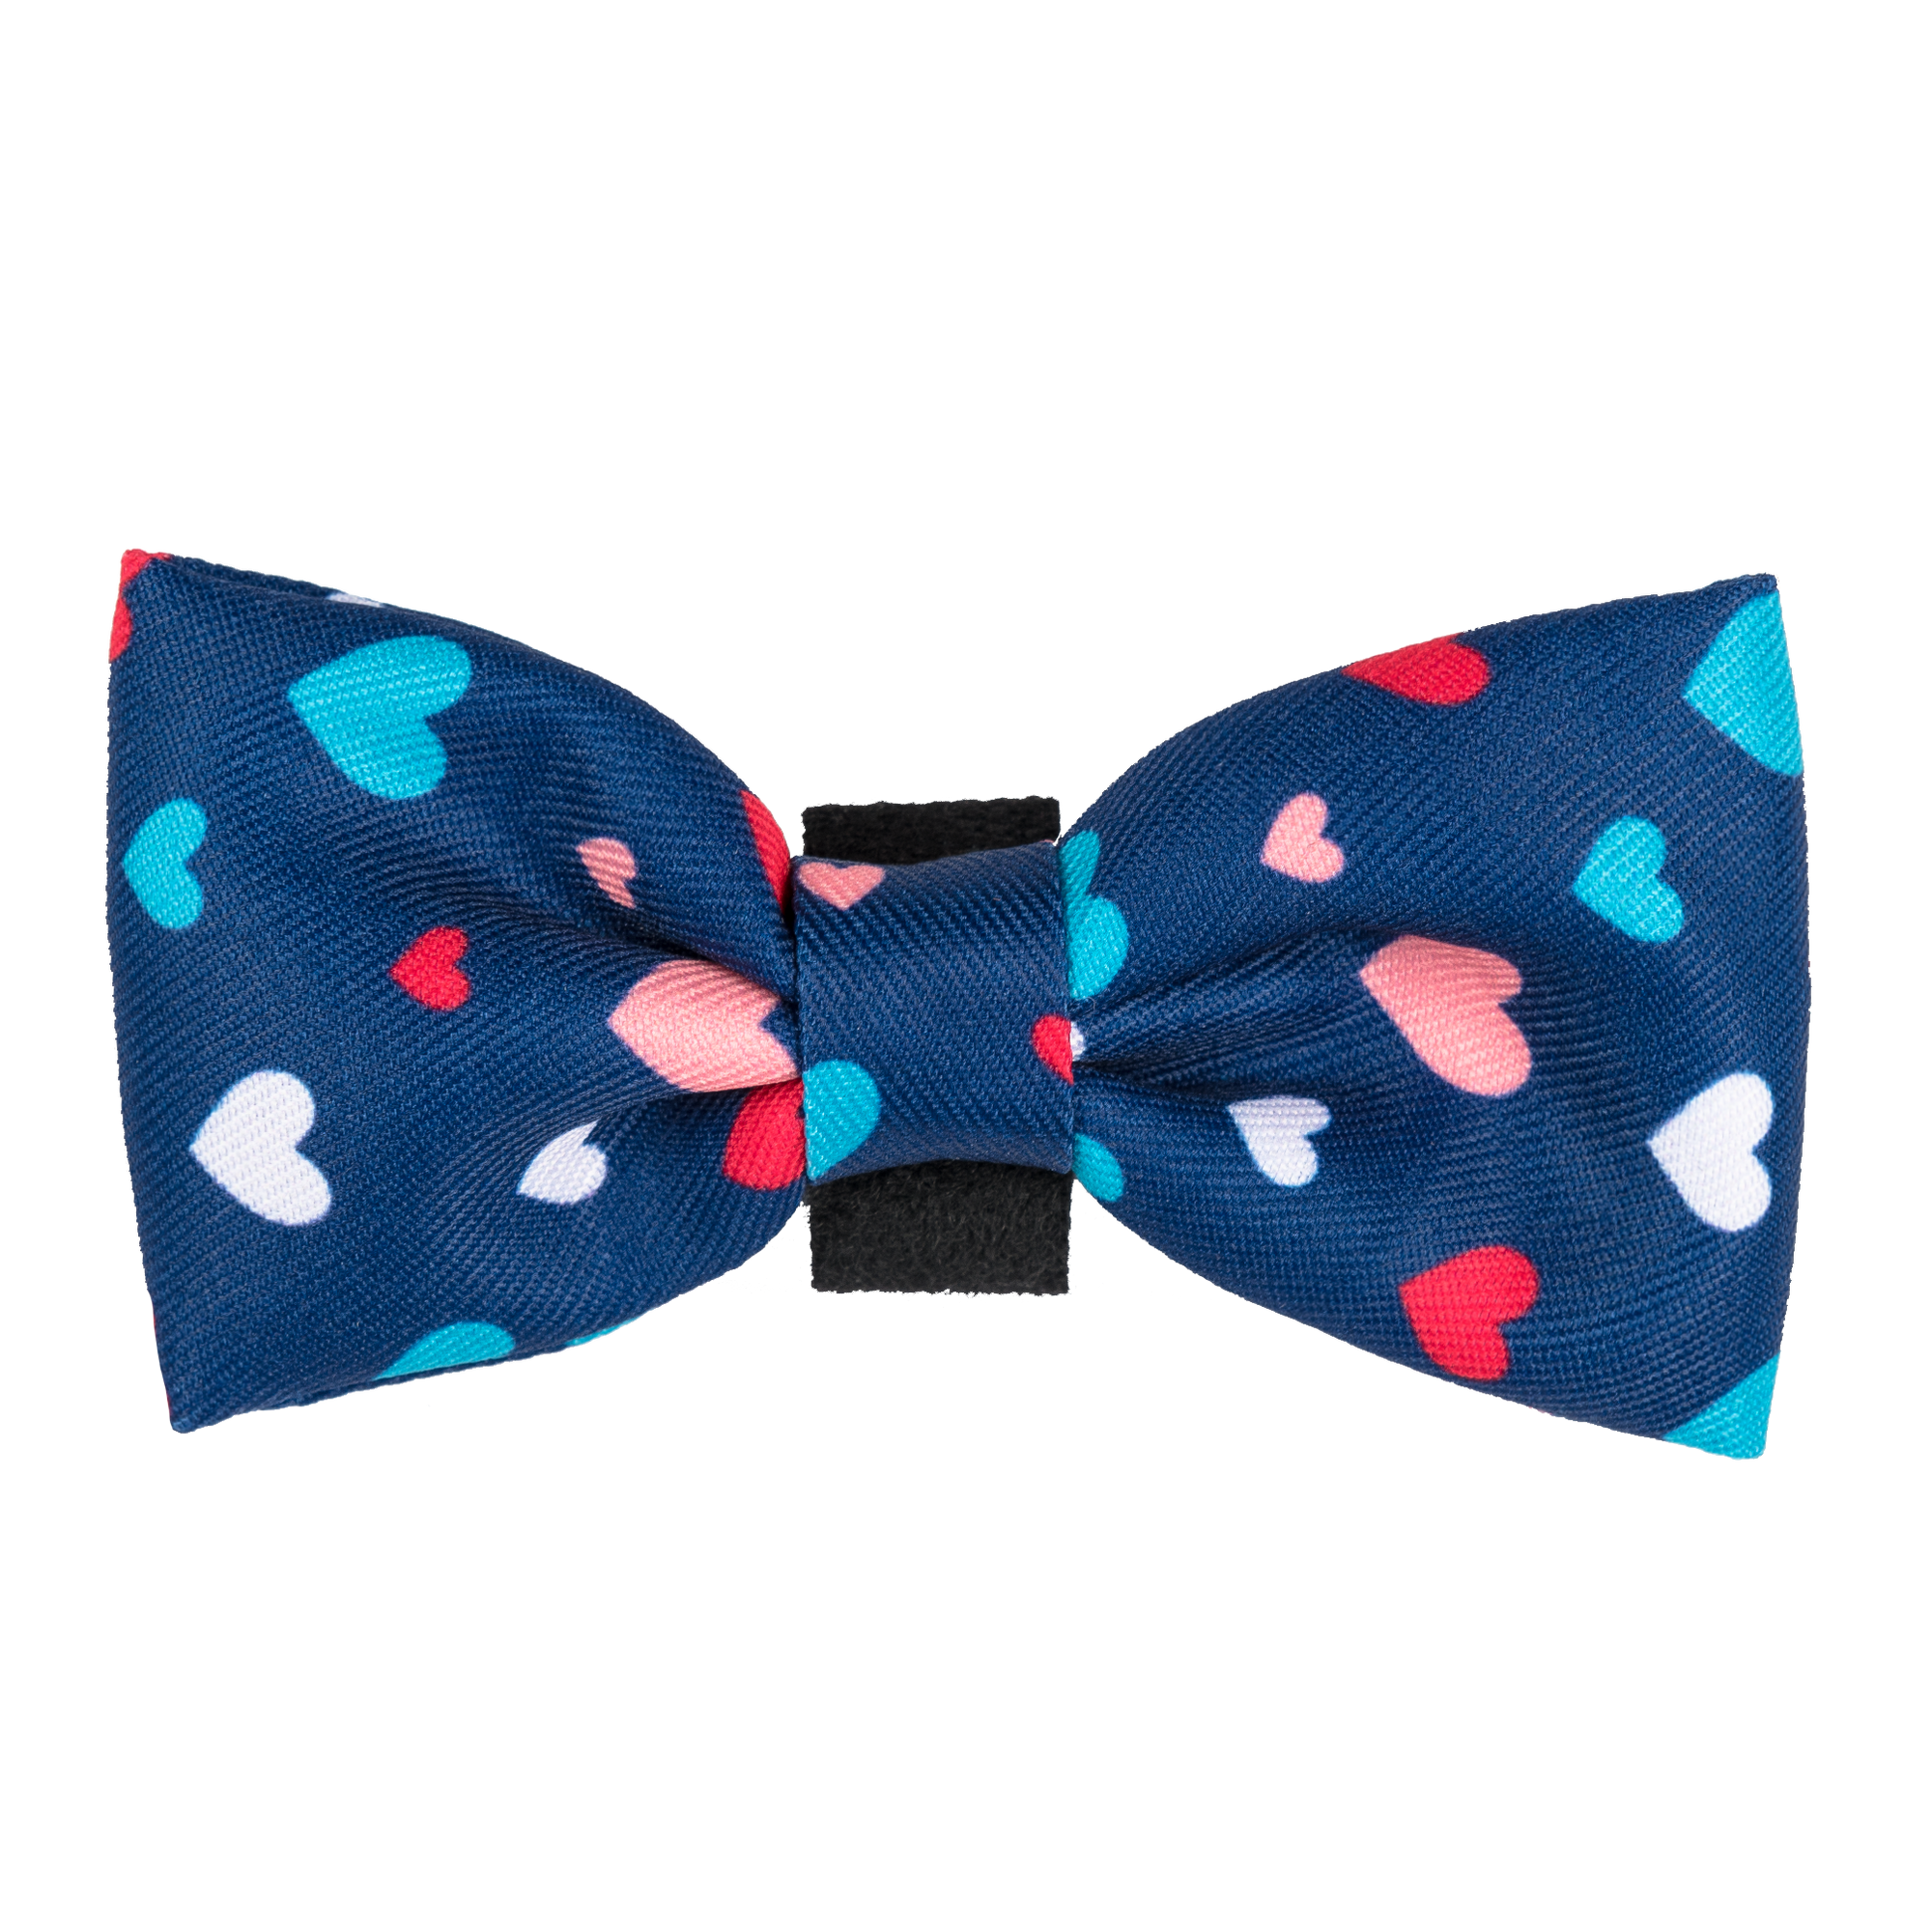 Bow Tie - All You Need Is Love